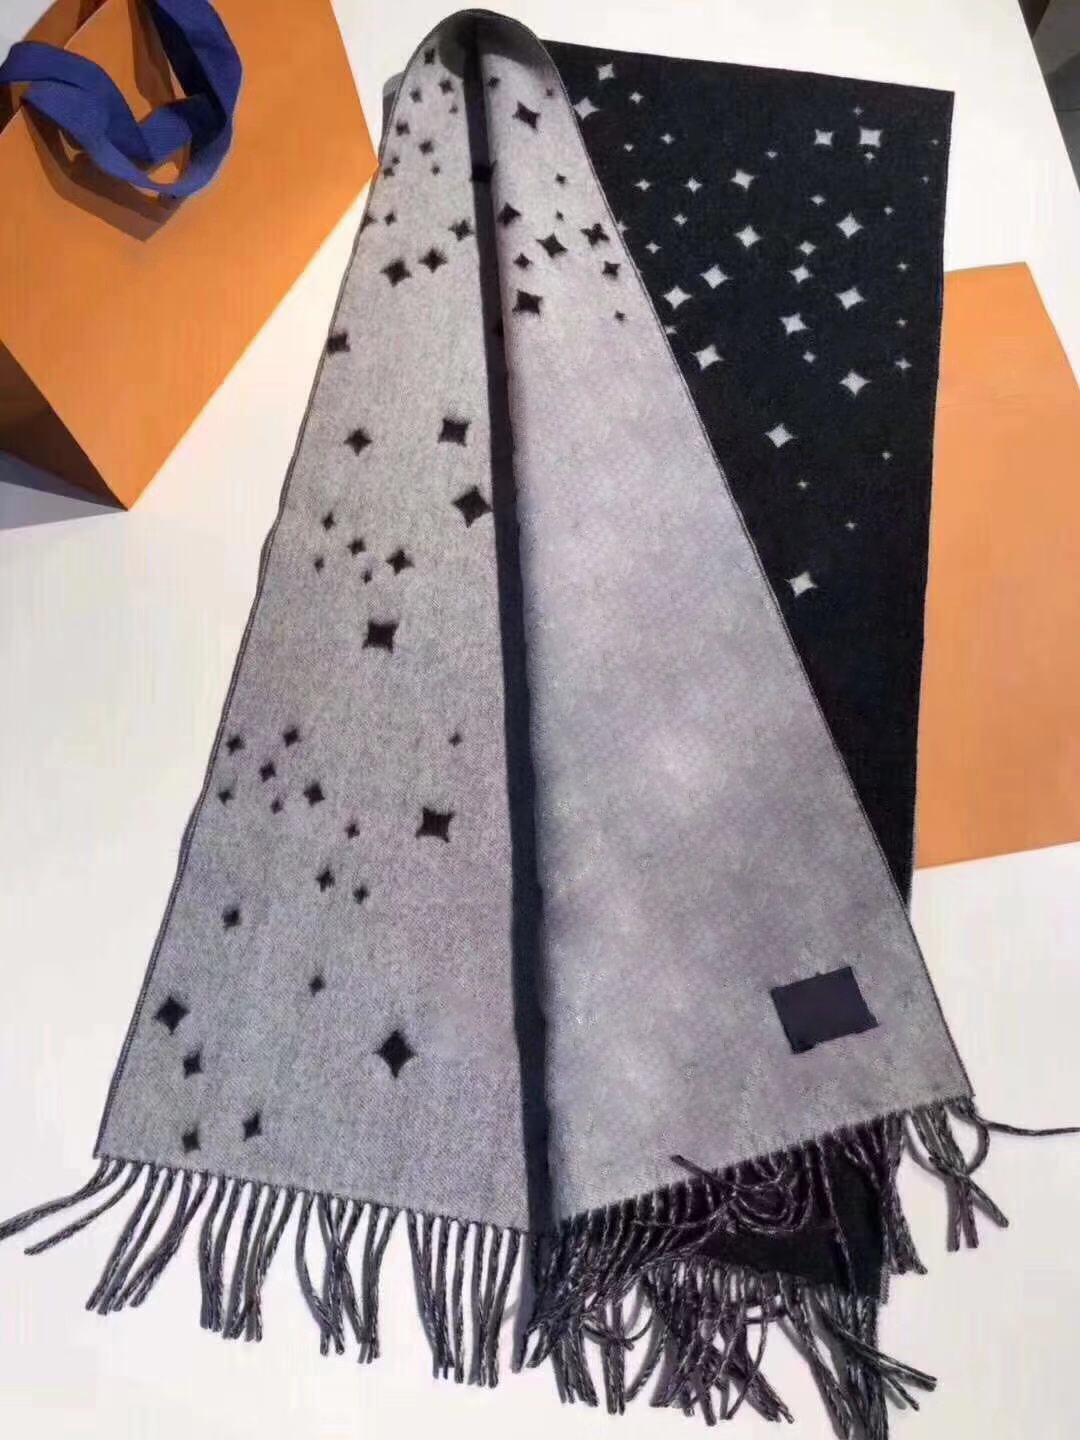 

Bright Starry Sky Cashmere Shawl Top Luxury Letter Scarf Original Brand Desinger Fashion Classic Scarves High Quality Pashmina Tassels Long 180cm With Box Set